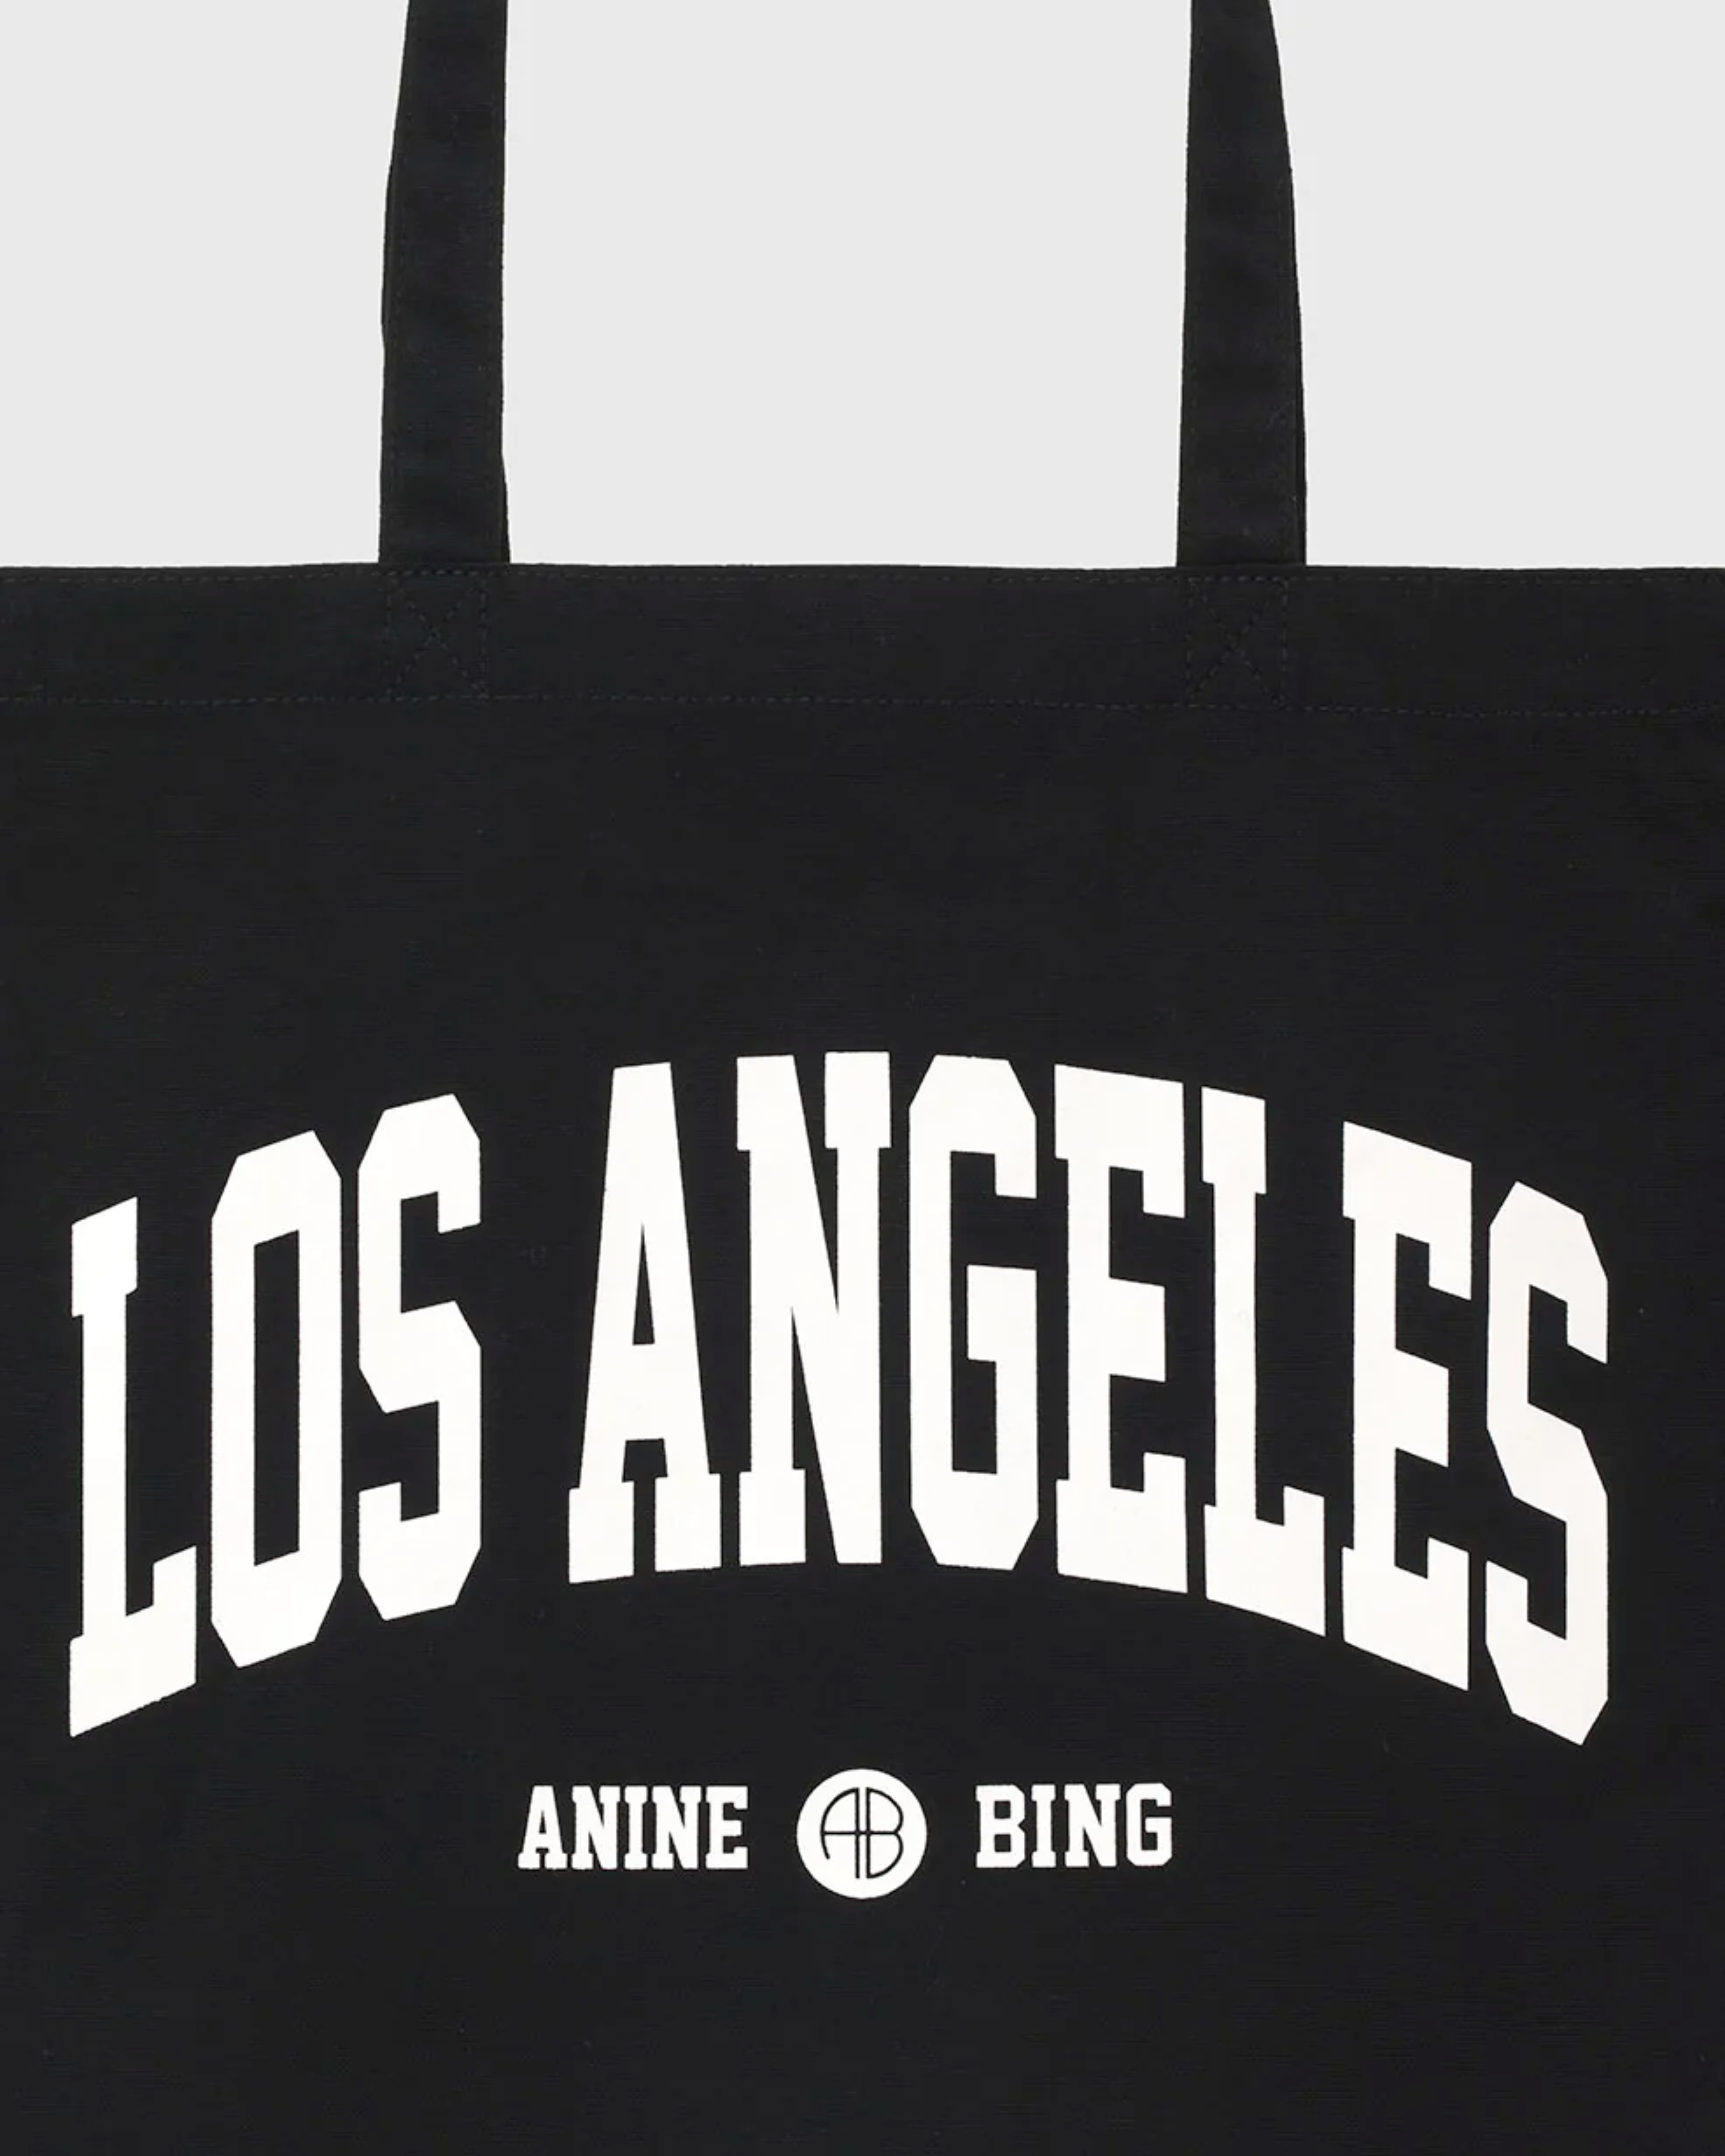 Anine Bing Remy Canvas Tote in Black